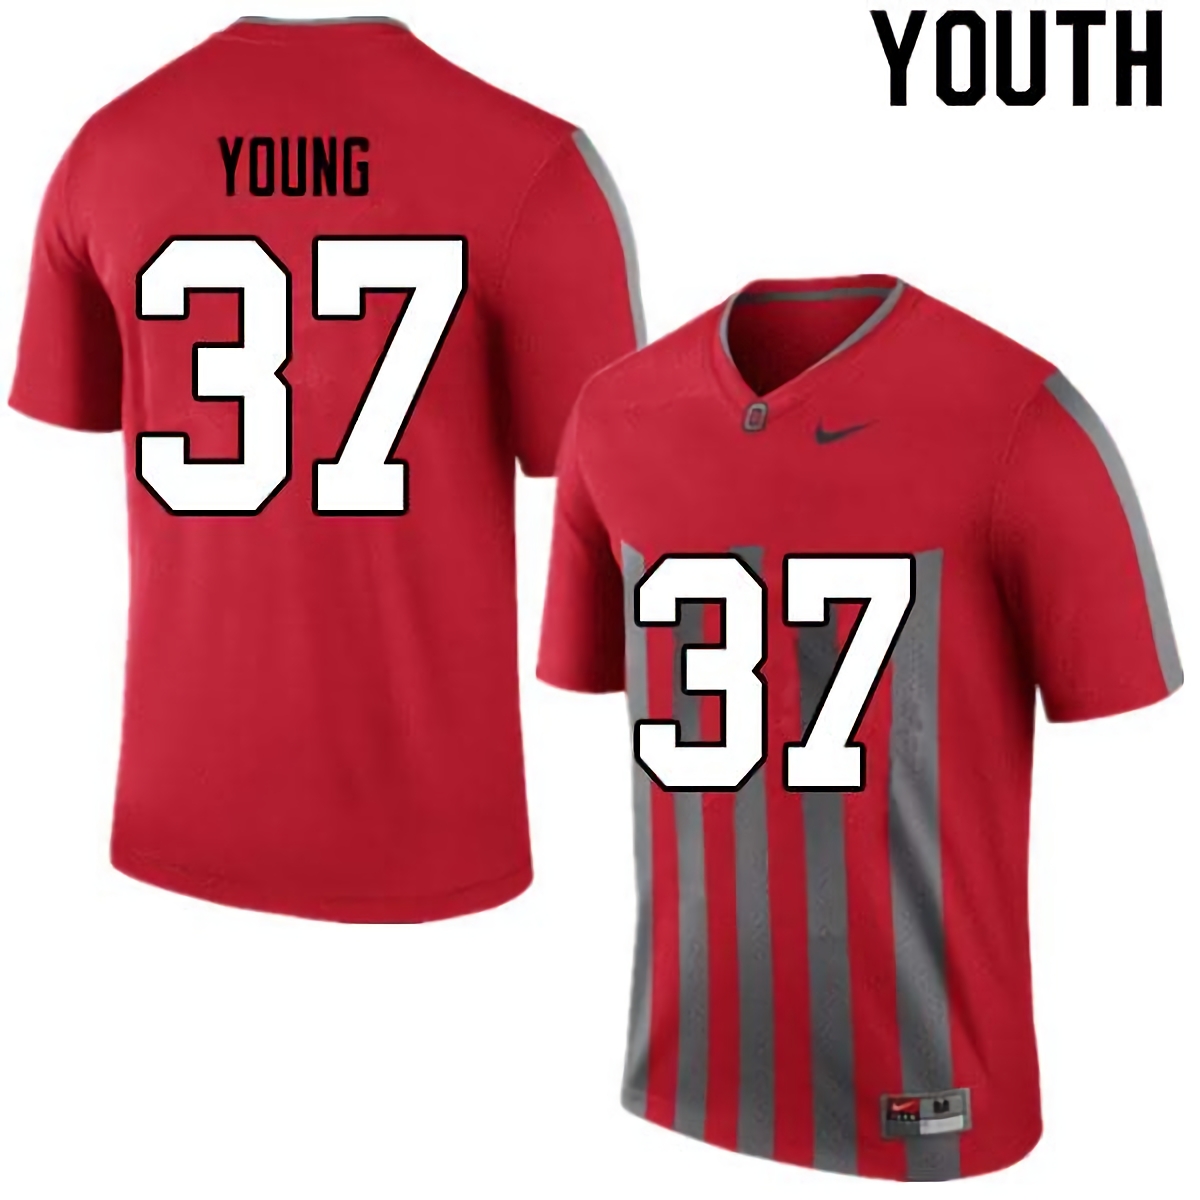 Craig Young Ohio State Buckeyes Youth NCAA #37 Nike Retro College Stitched Football Jersey VAJ4556QG